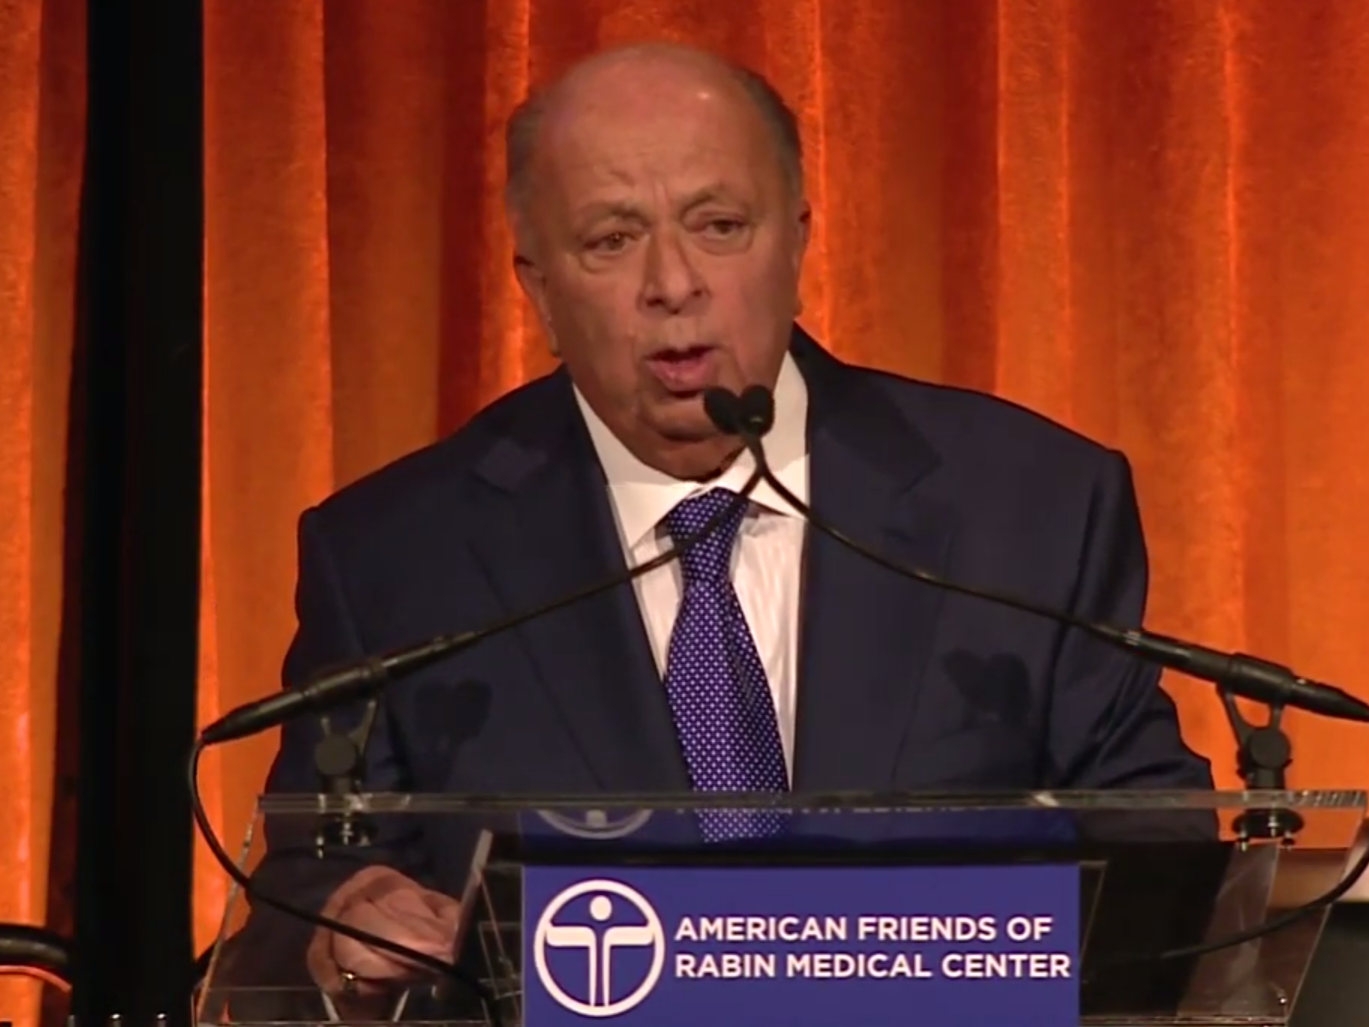 Stanley Chera at the American Friends of Rabin Medical Center (AFRMC) 2014 gala